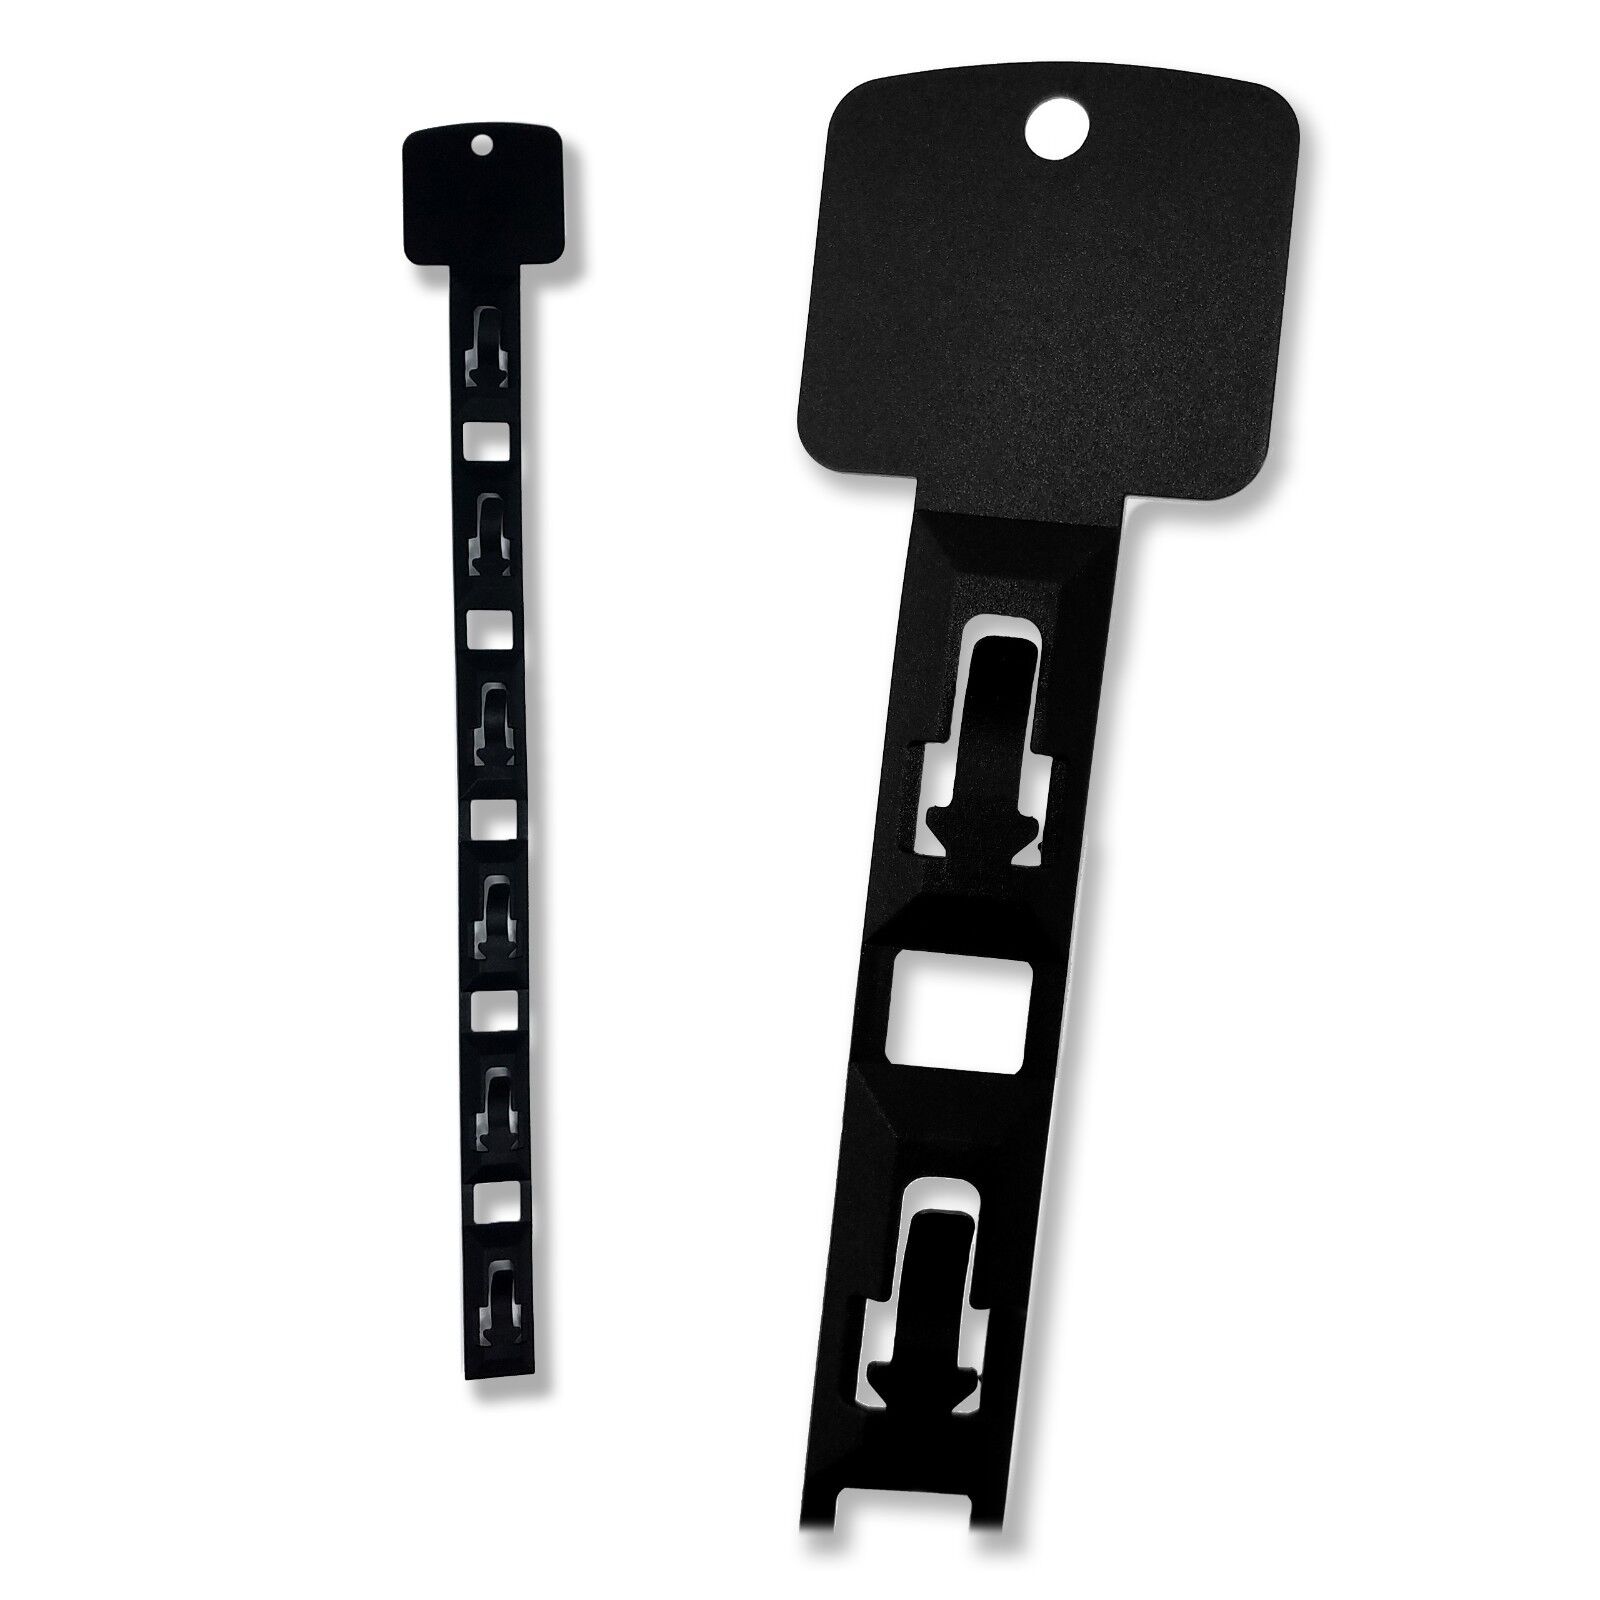 Black Hanging Merchandise Strips Plastic Strip Display with Clips for 6 items